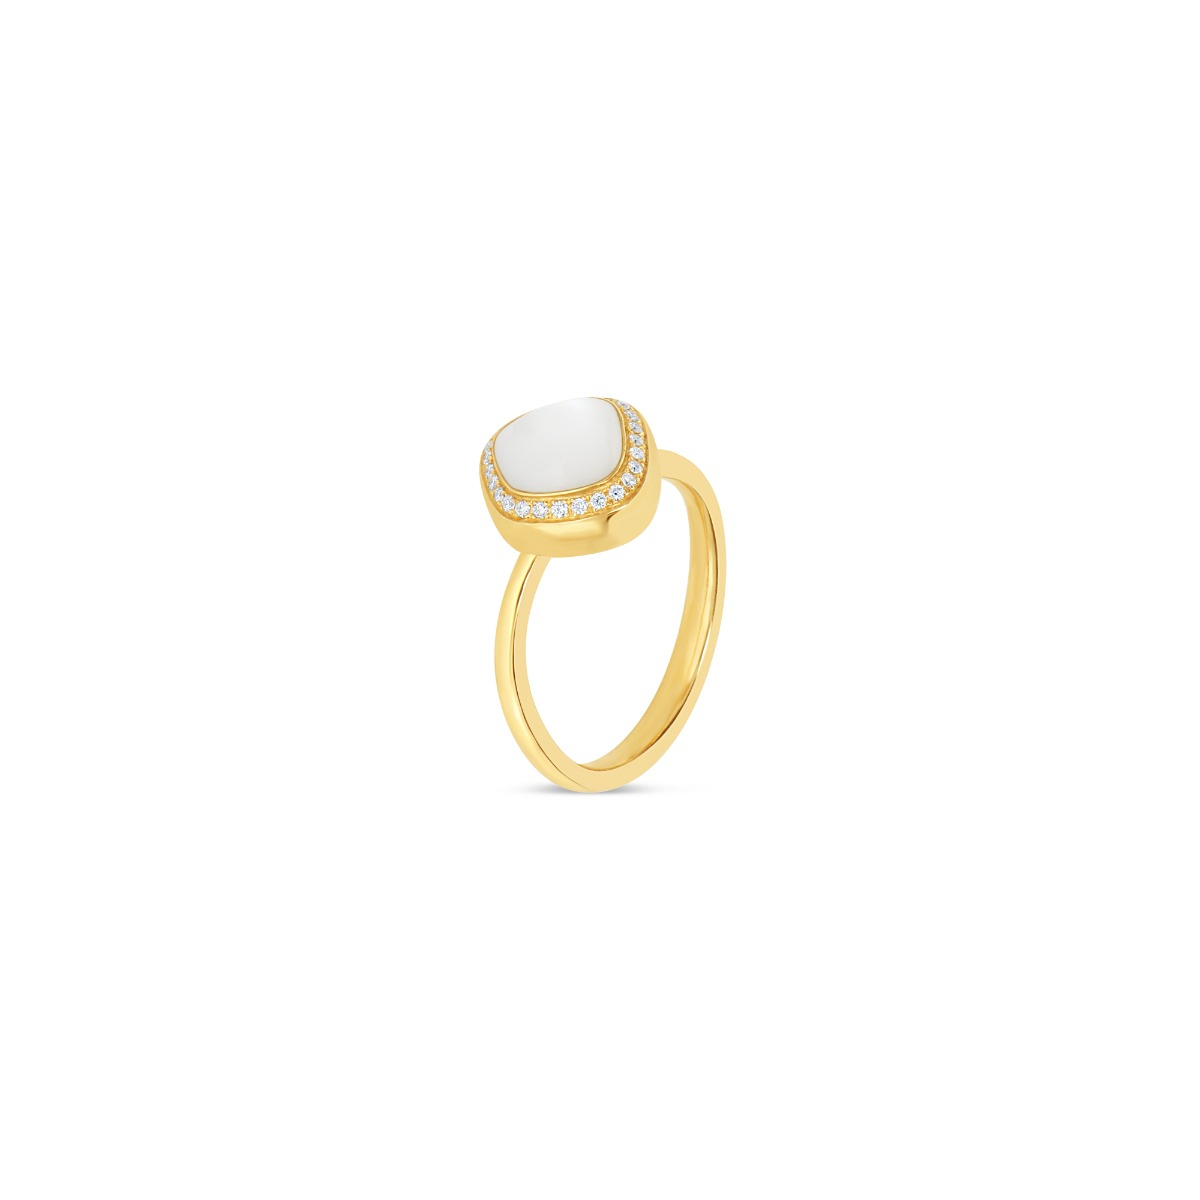 Abstract-Cut White Stone Ring with Diamonds